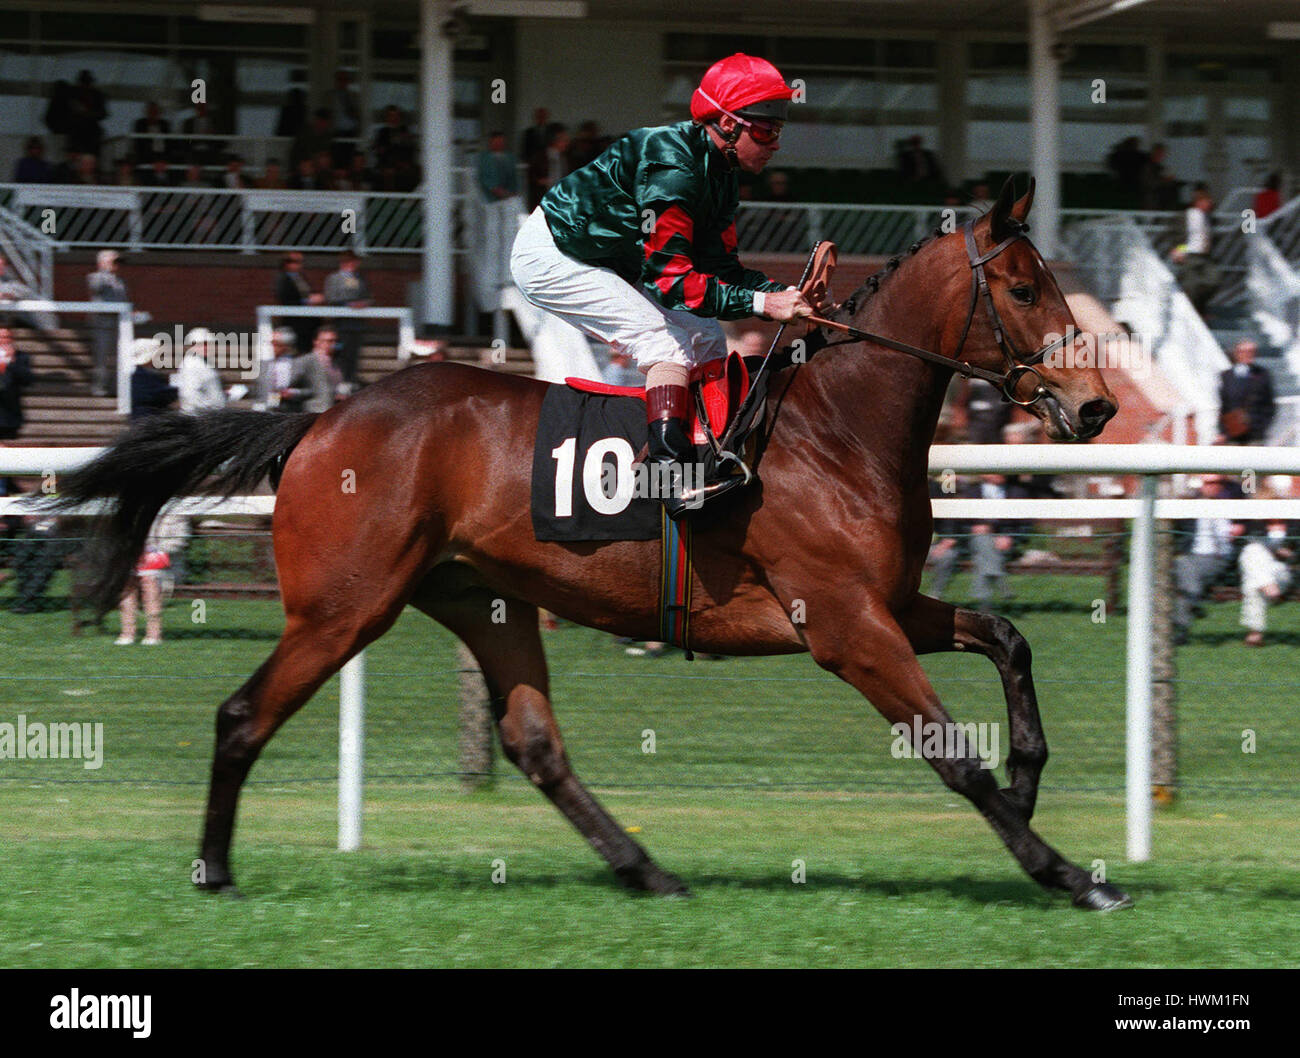 MAN OF WIT RIDDEN BY BRENT THOMPSON 25 April 1995 Stock Photo